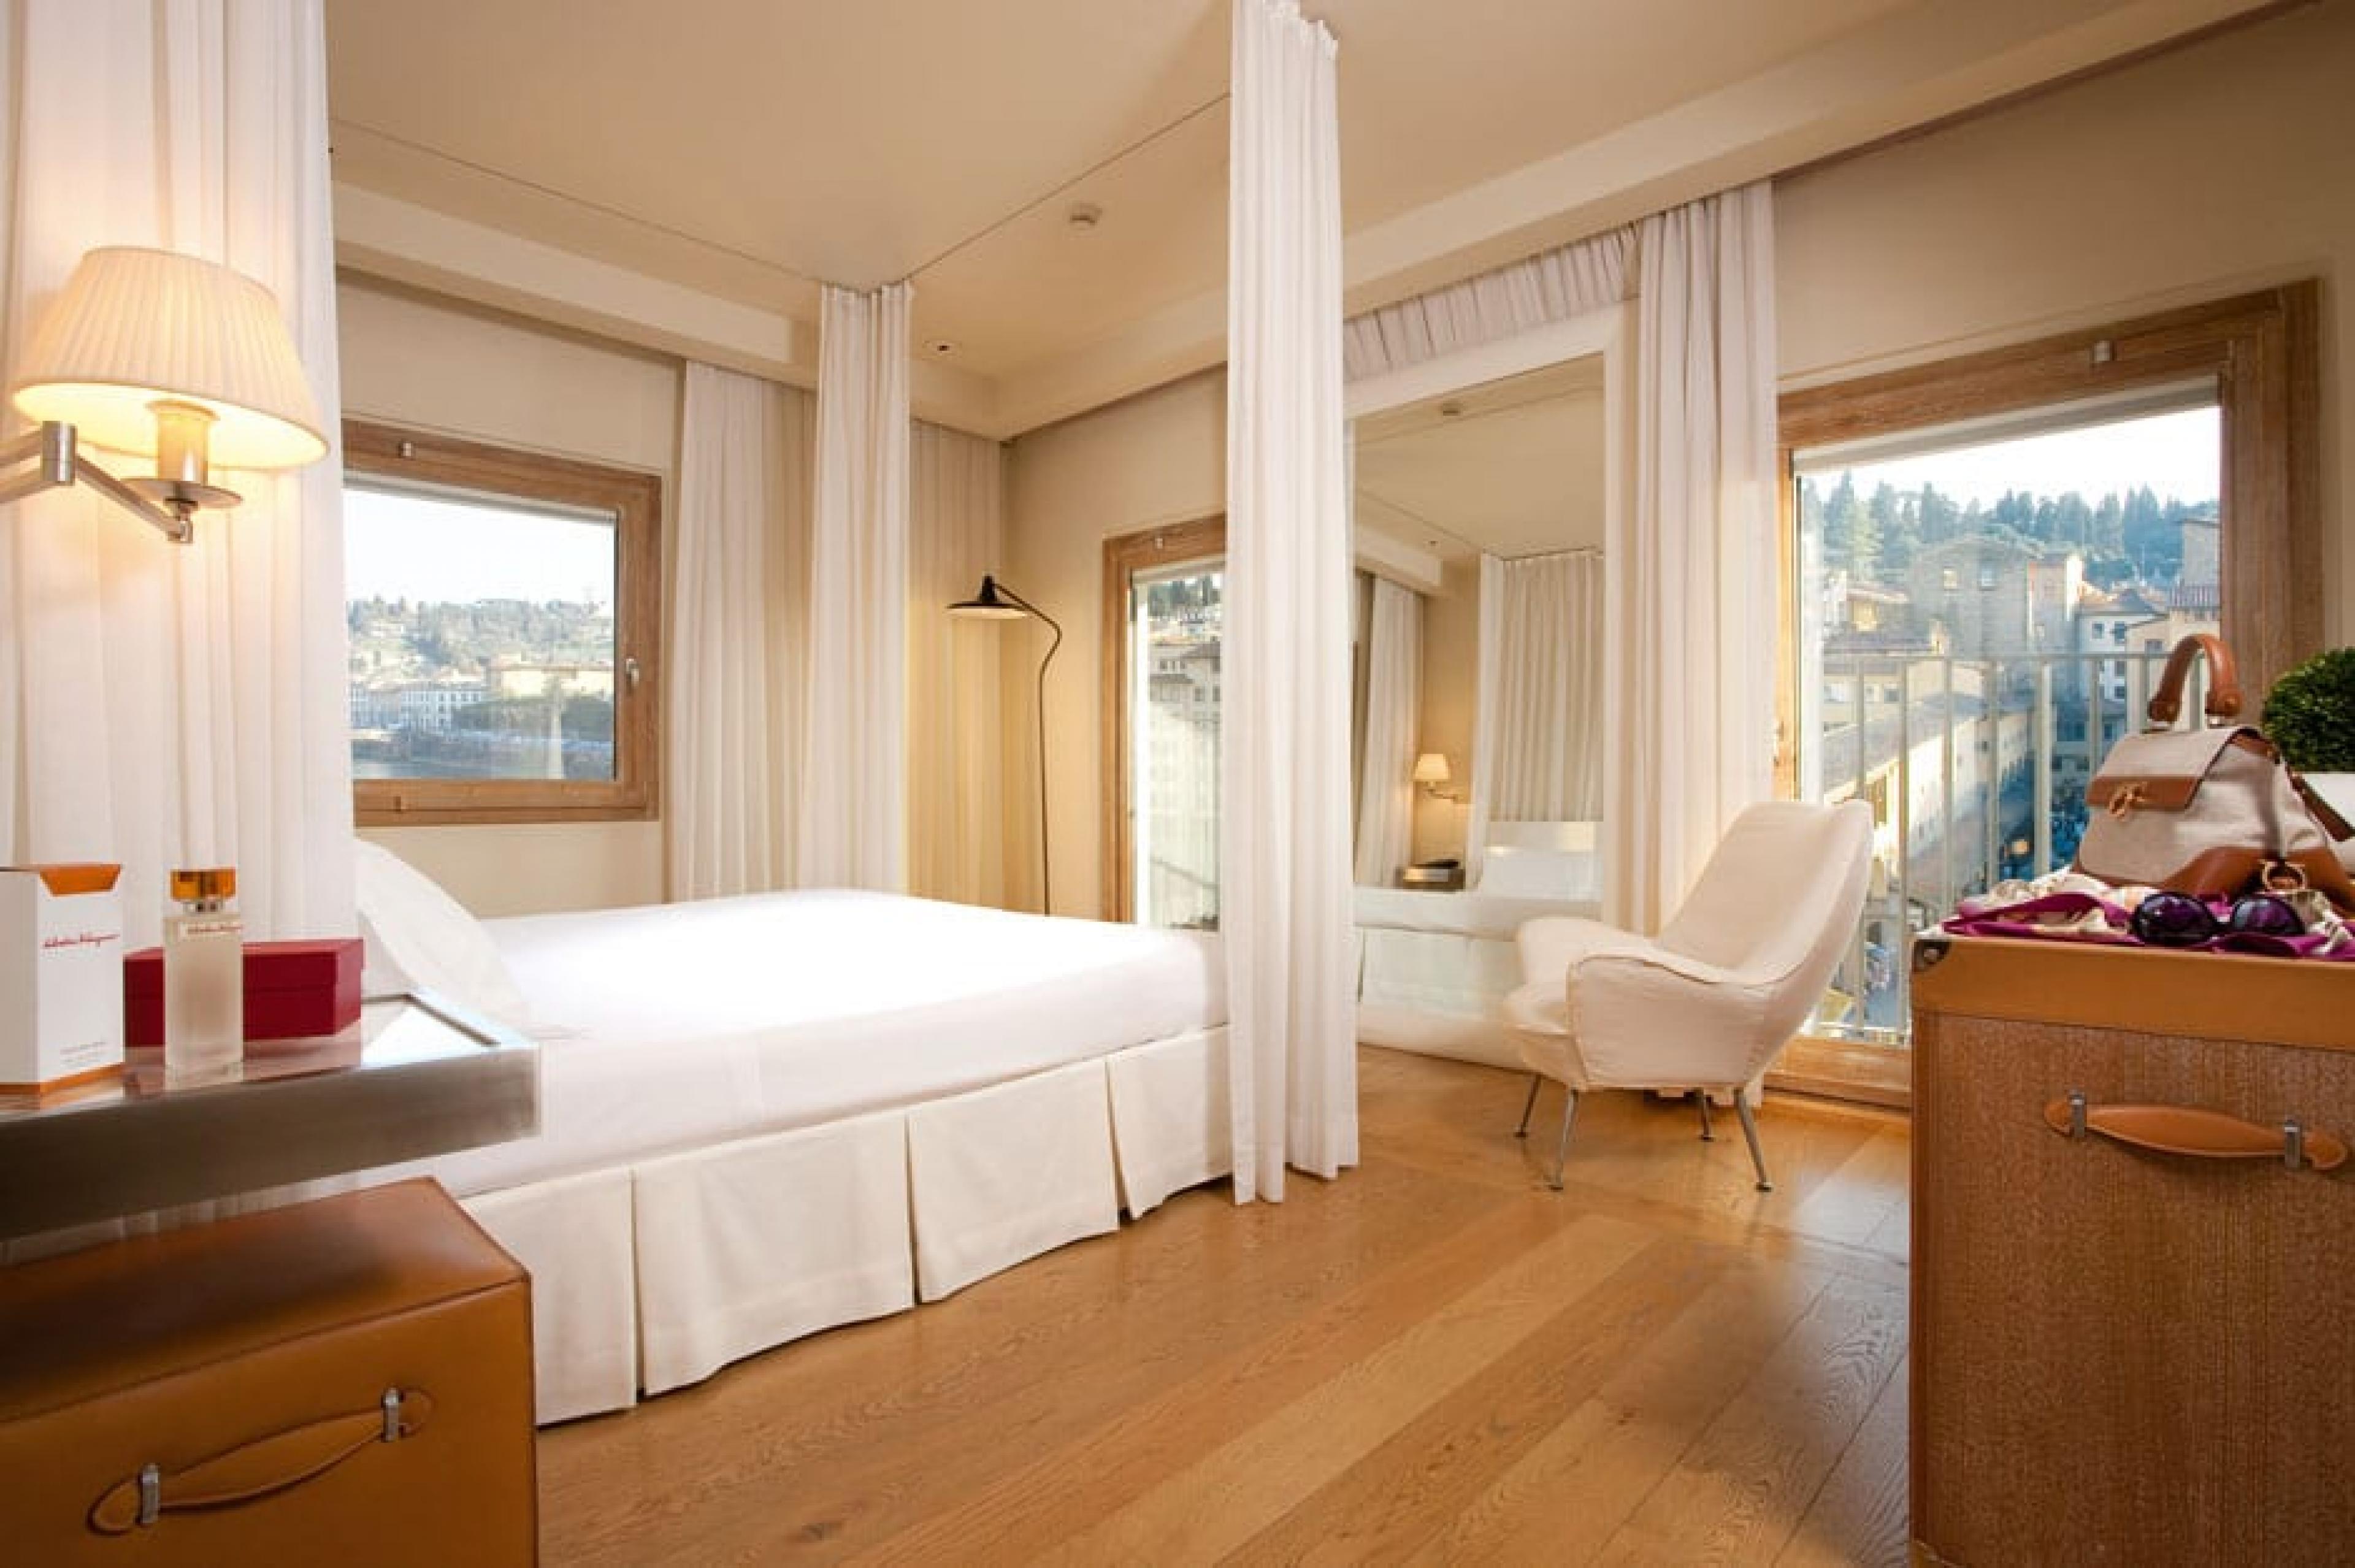 Prestige Room at Continentale, Florence, Italy